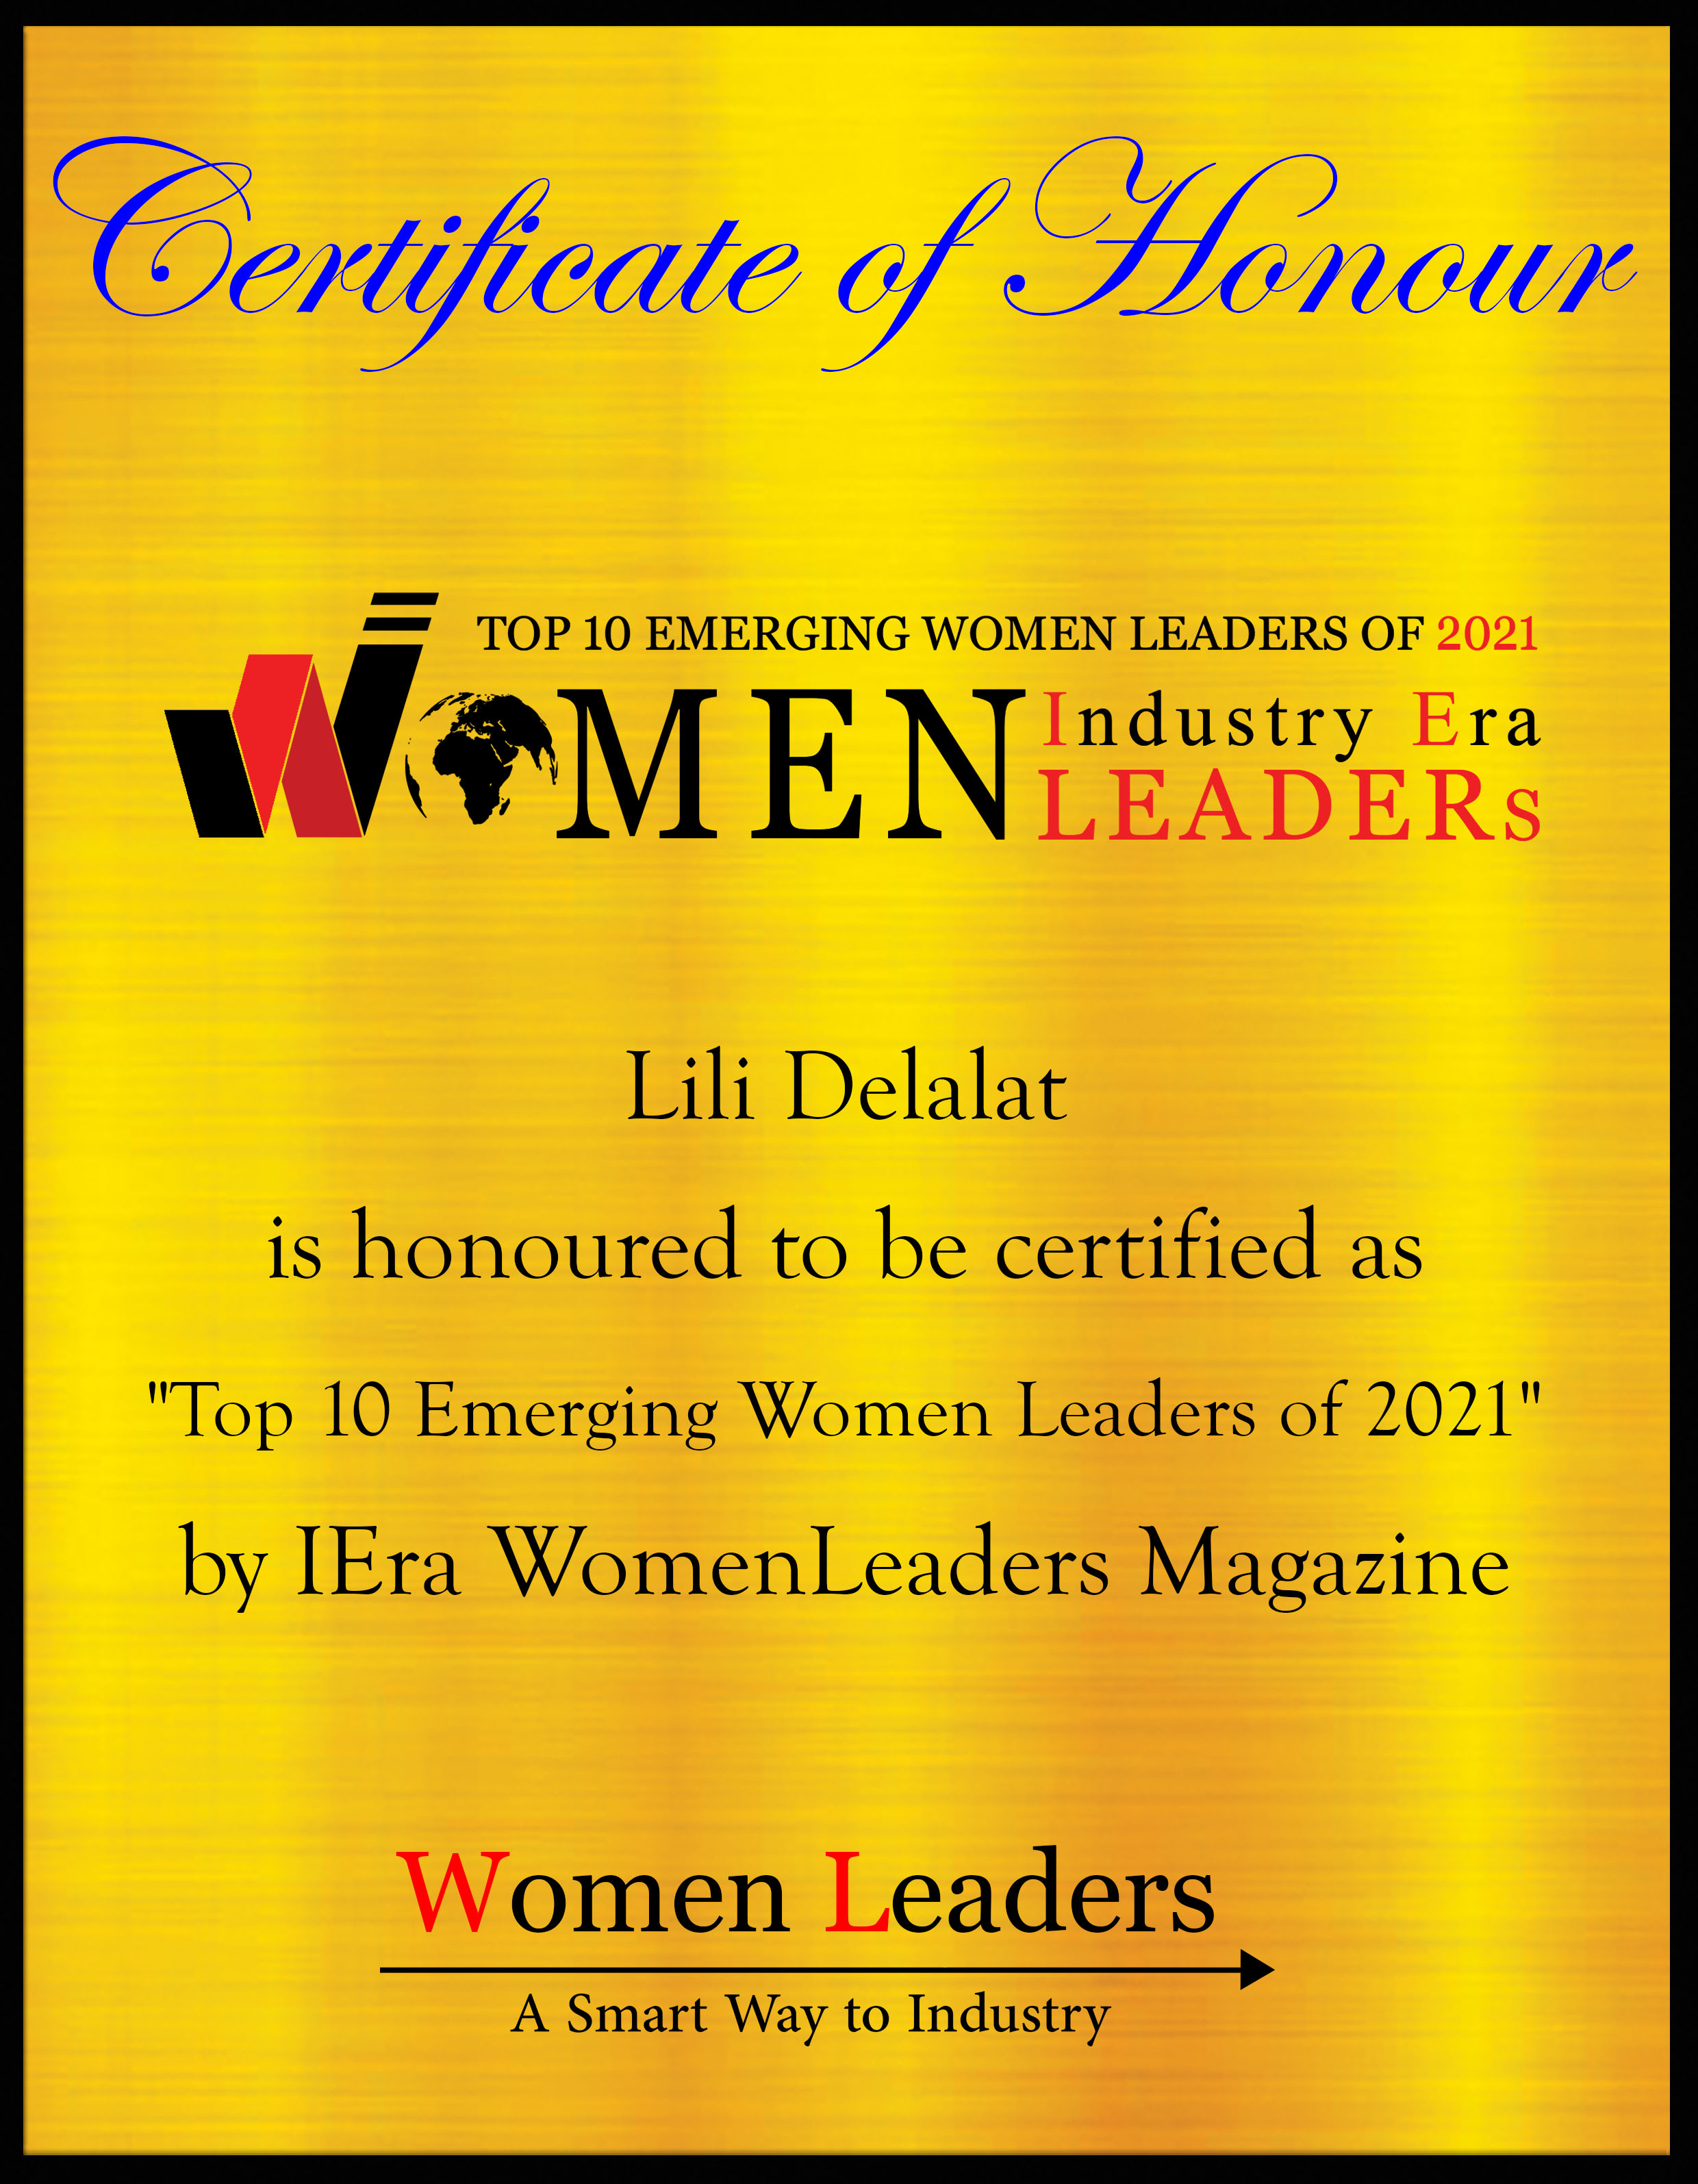 Lili Delalat, CEO & CIO at Artis Energy, Most Empowering Women Leaders of 2021